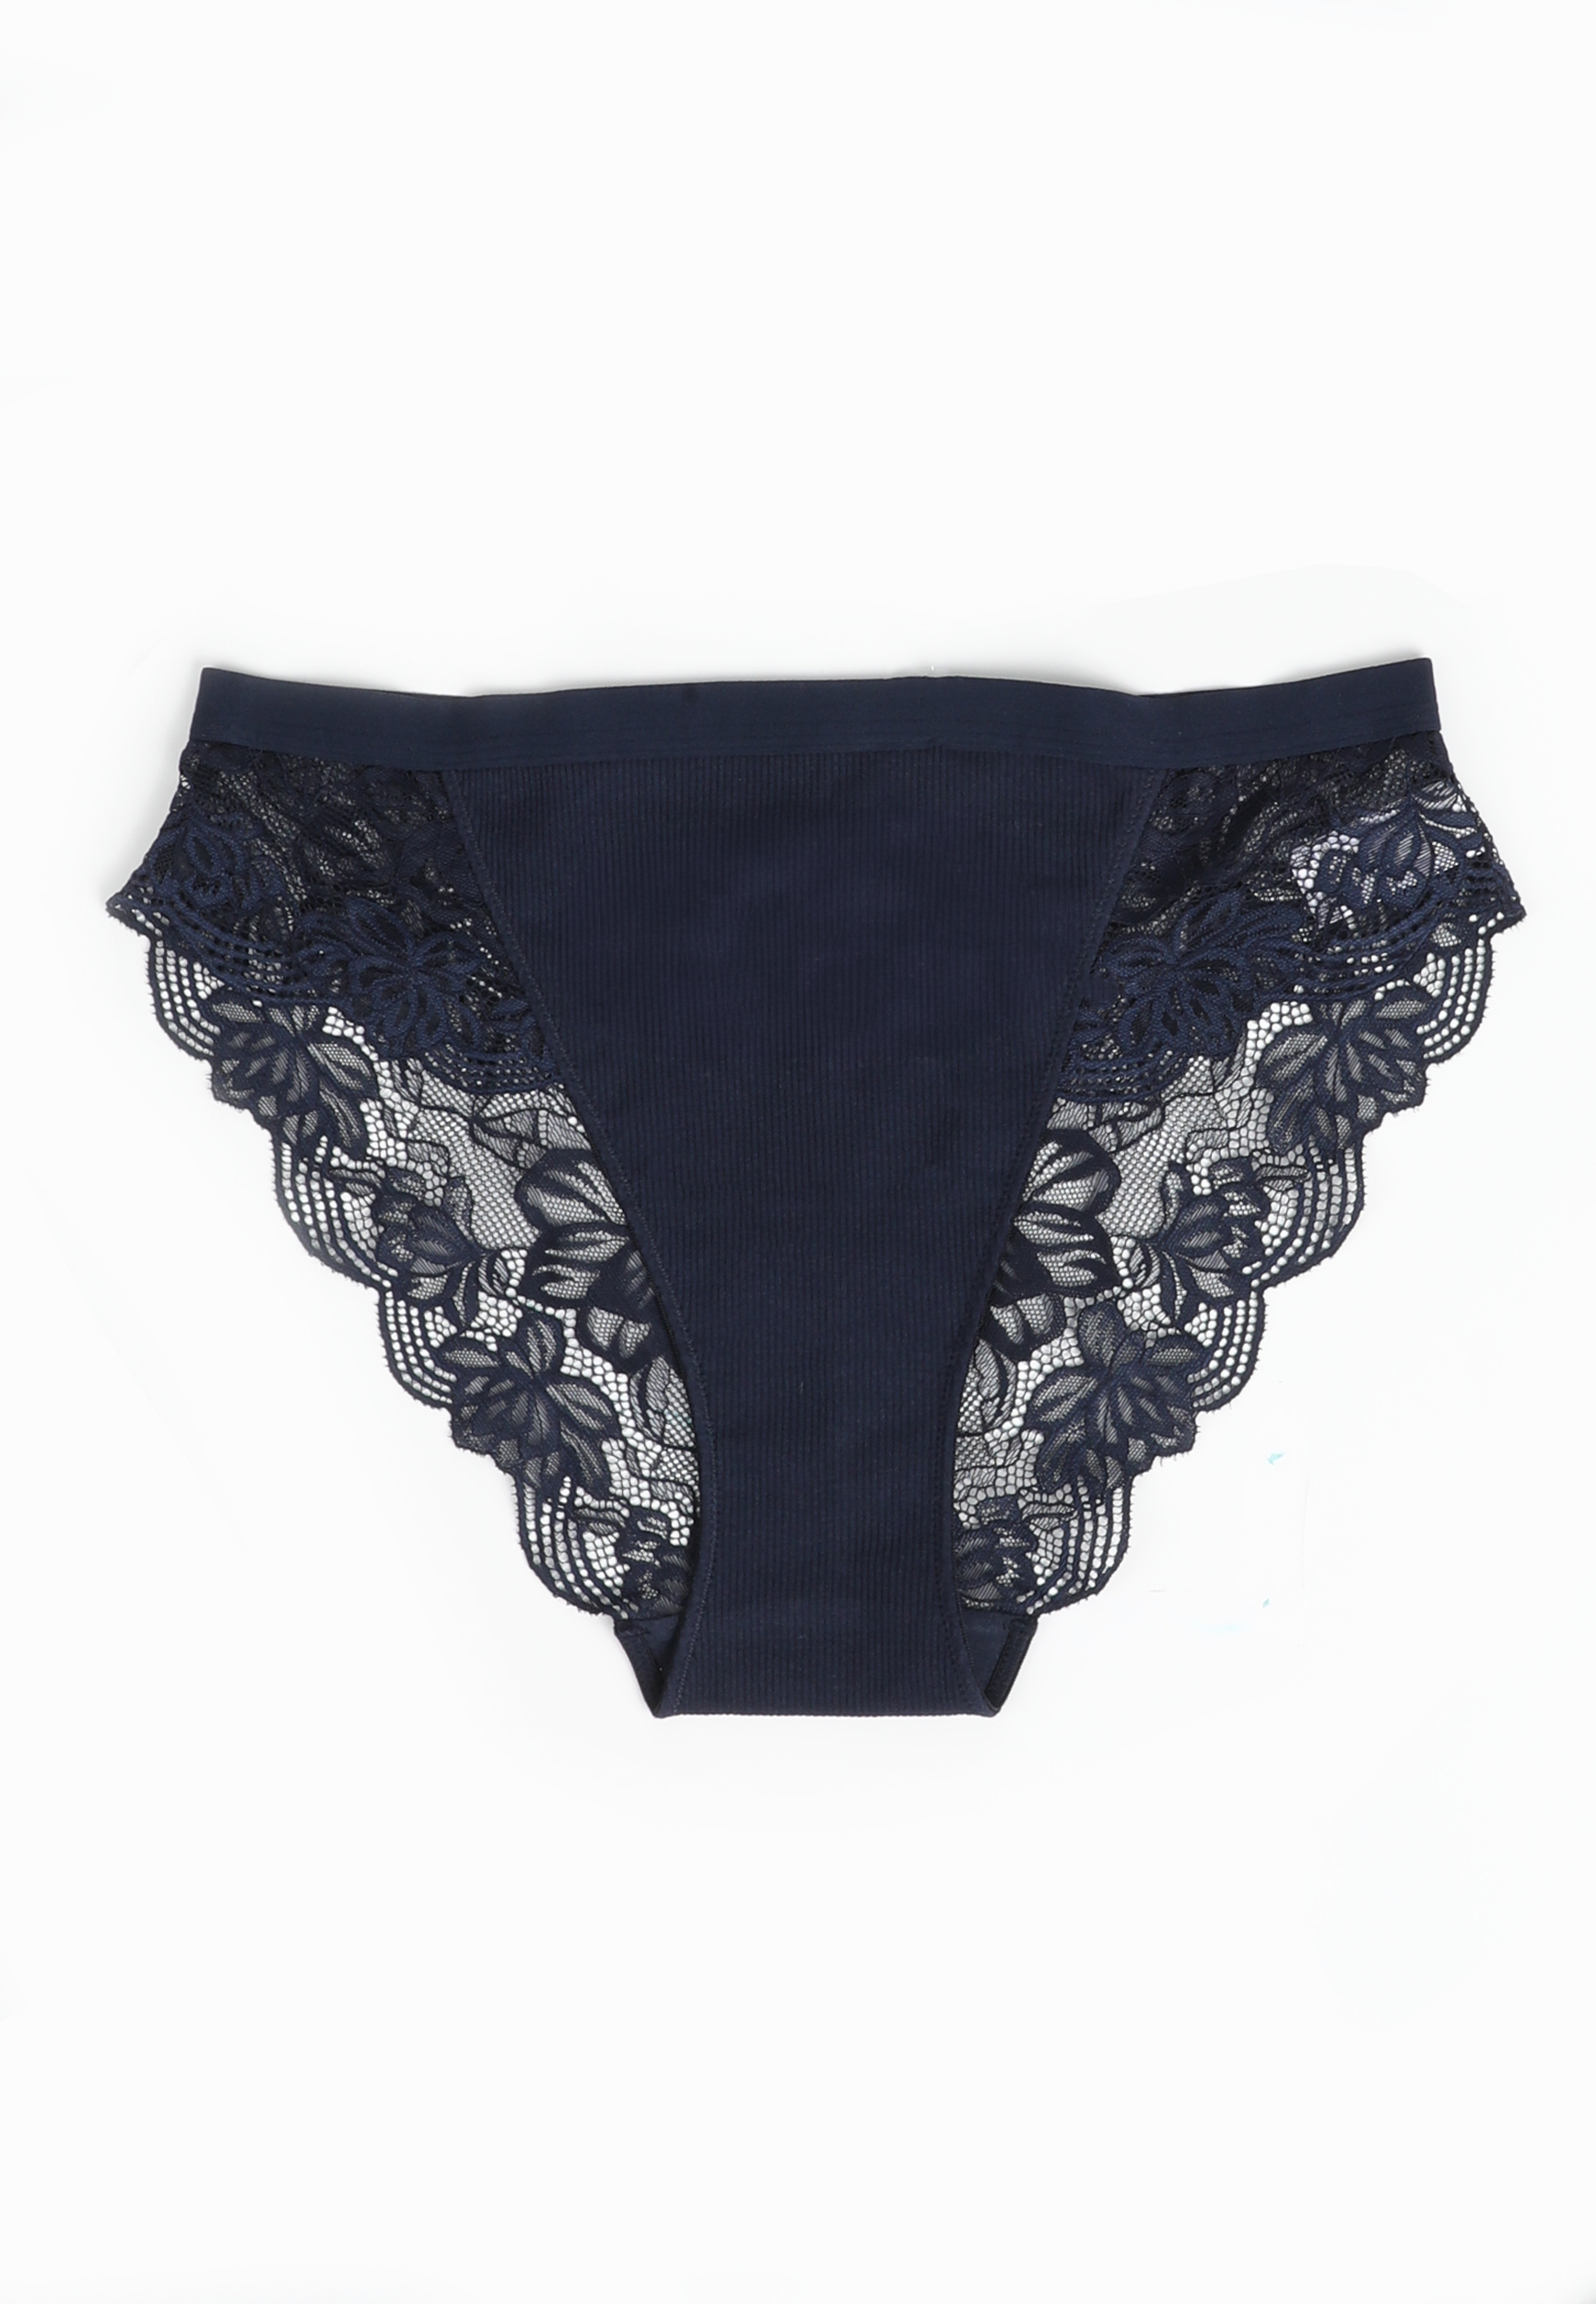 maurices Launches New Intimate Apparel and Sleepwear Lines